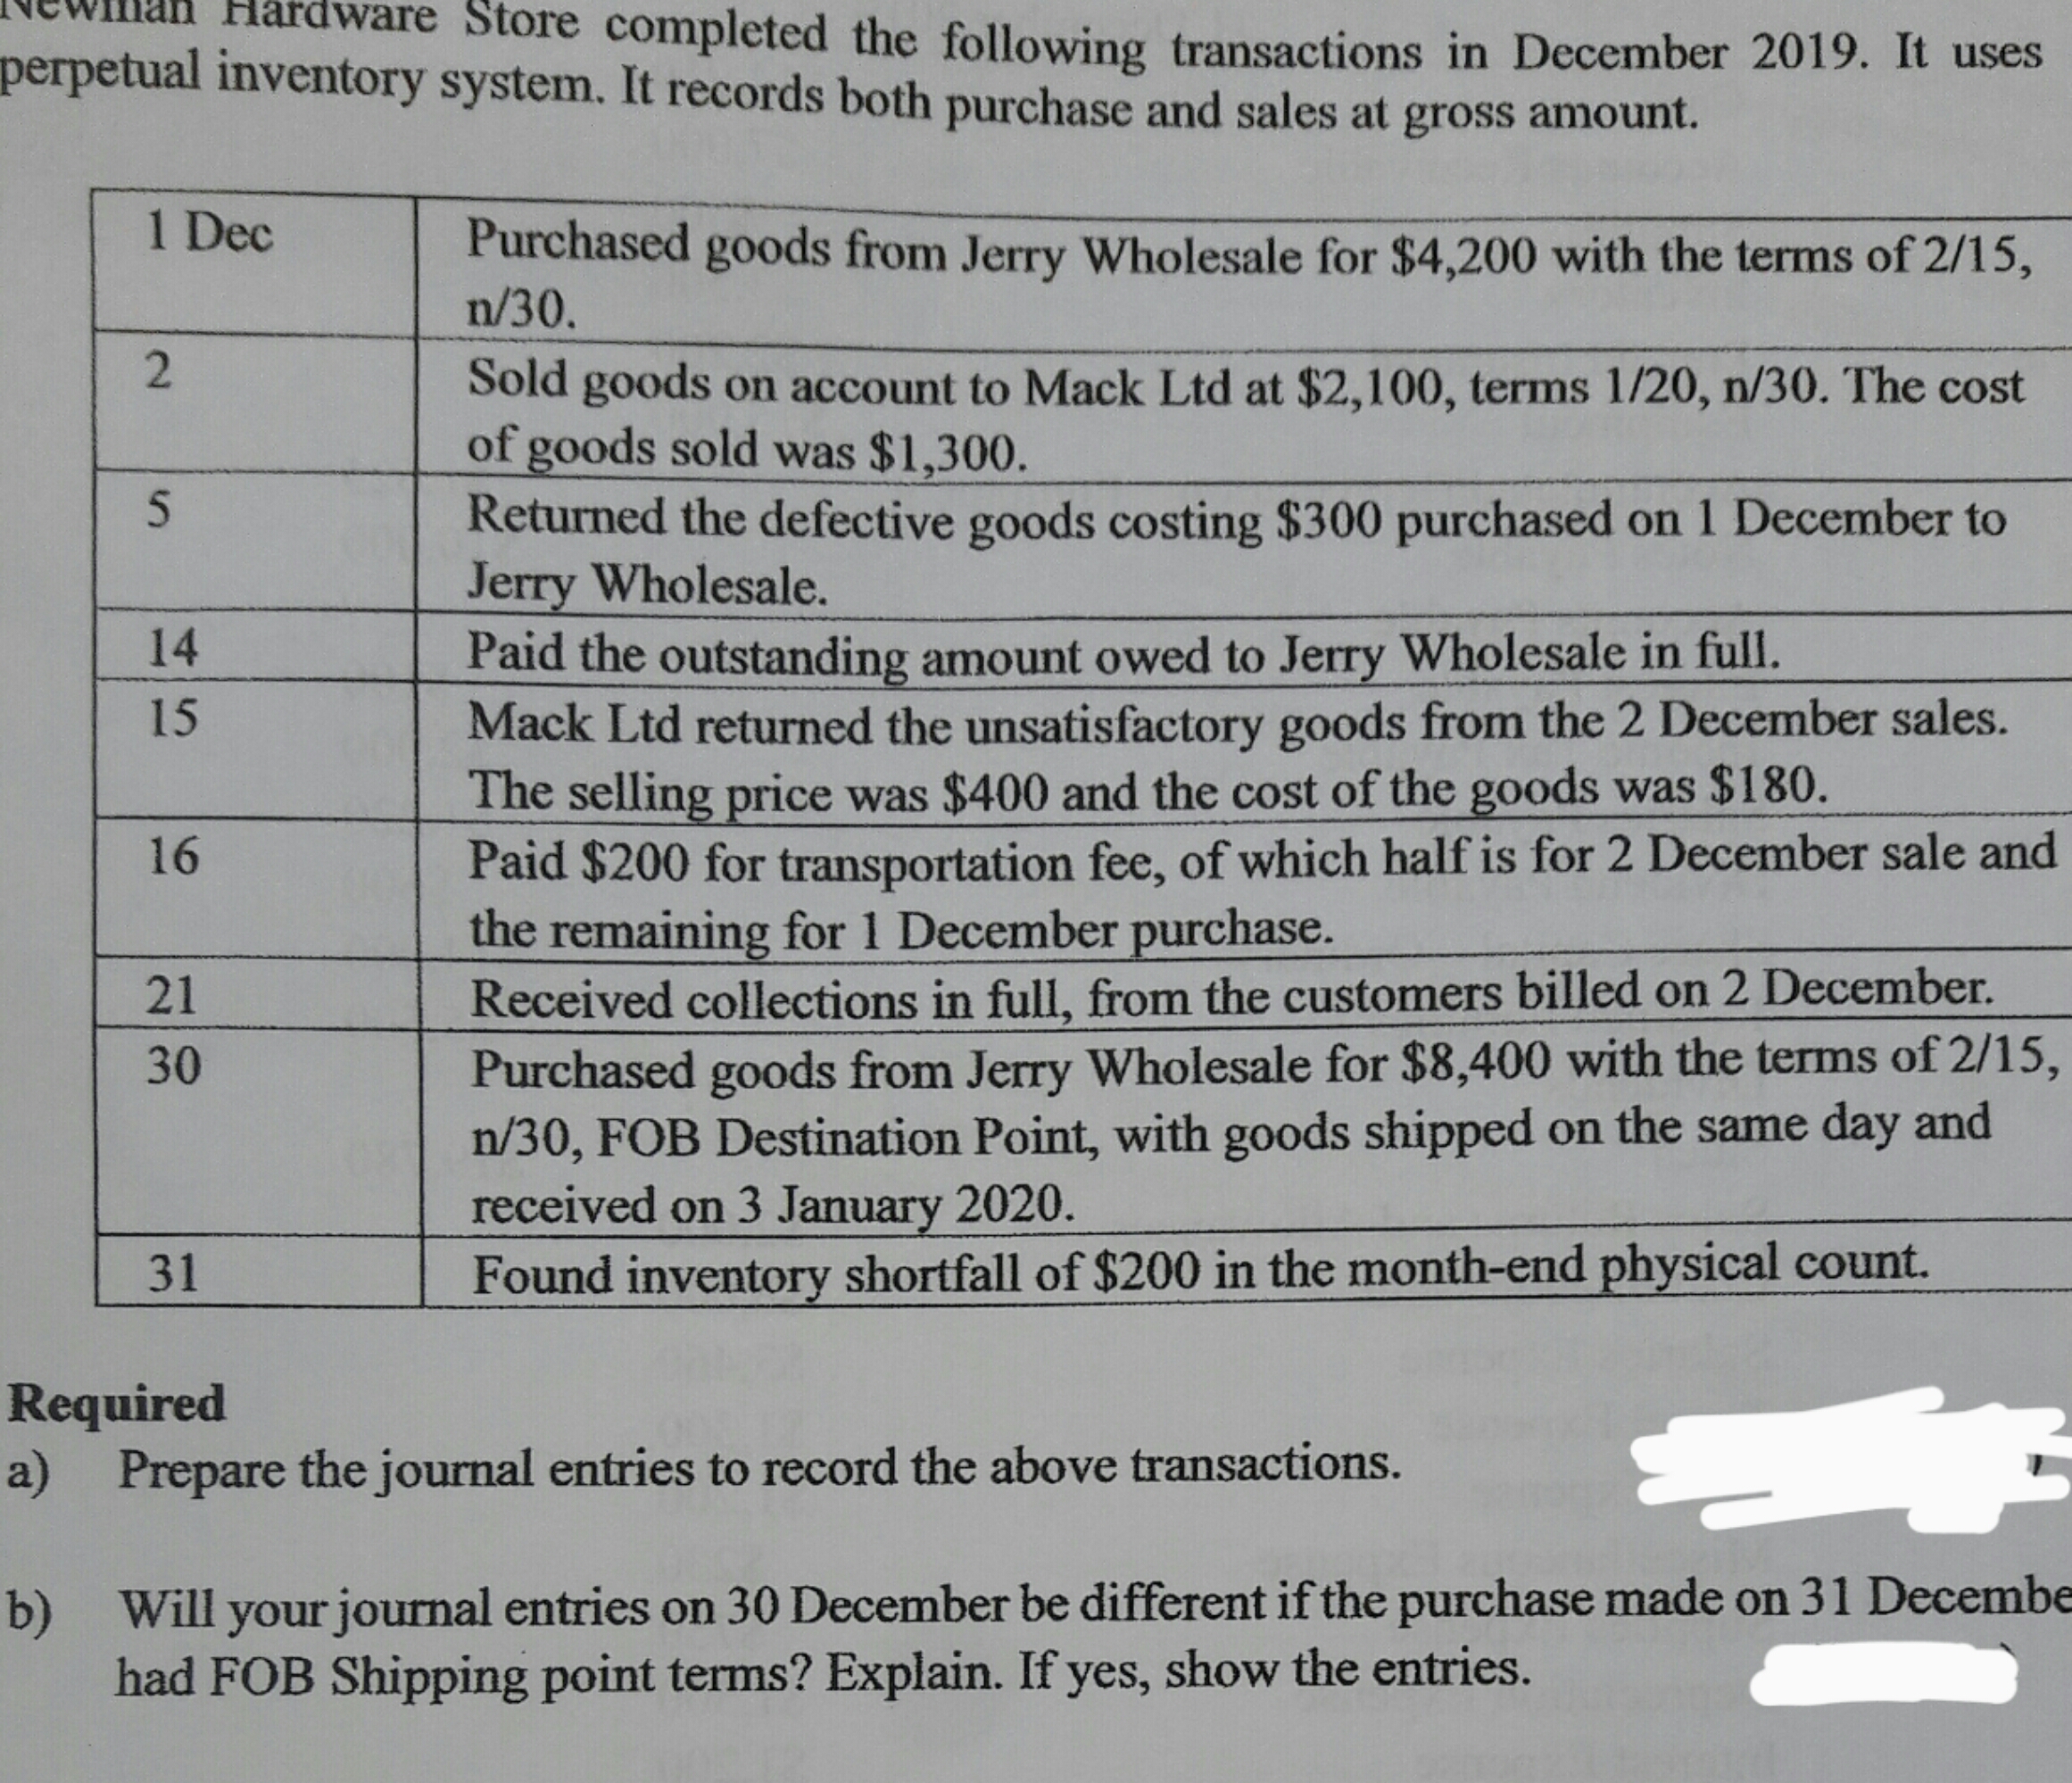 Hardware Store completed the following transactions in December 2019. It uses
perpetual inventory system. It records both purchase and sales at gross amount.
1 Dec
Purchased goods from Jerry Wholesale for $4,200 with the terms of 2/15,
n/30.
Sold goods on account to Mack Ltd at $2,100, terms 1/20, n/30. The cost
of goods sold was $1,300.
Returned the defective goods costing $300 purchased on 1 December to
Jerry Wholesale.
Paid the outstanding amount owed to Jerry Wholesale in full.
Mack Ltd returned the unsatisfactory goods from the 2 December sales.
The selling price was $400 and the cost of the goods was $180.
Paid $200 for transportation fee, of which half is for 2 December sale and
the remaining for 1 December purchase.
14
15
16
Received collections in full, from the customers billed on 2 December.
Purchased goods from Jerry Wholesale for $8,400 with the terms of 2/15,
n/30, FOB Destination Point, with goods shipped on the same day and
received on 3 January 2020.
Found inventory shortfall of $200 in the month-end physical count.
21
30
31
Required
a) Prepare the journal entries to record the above transactions.
b)
Will your journal entries on 30 December be different if the purchase made on 31 Decembe
had FOB Shipping point terms? Explain. If yes, show the entries.
2.
